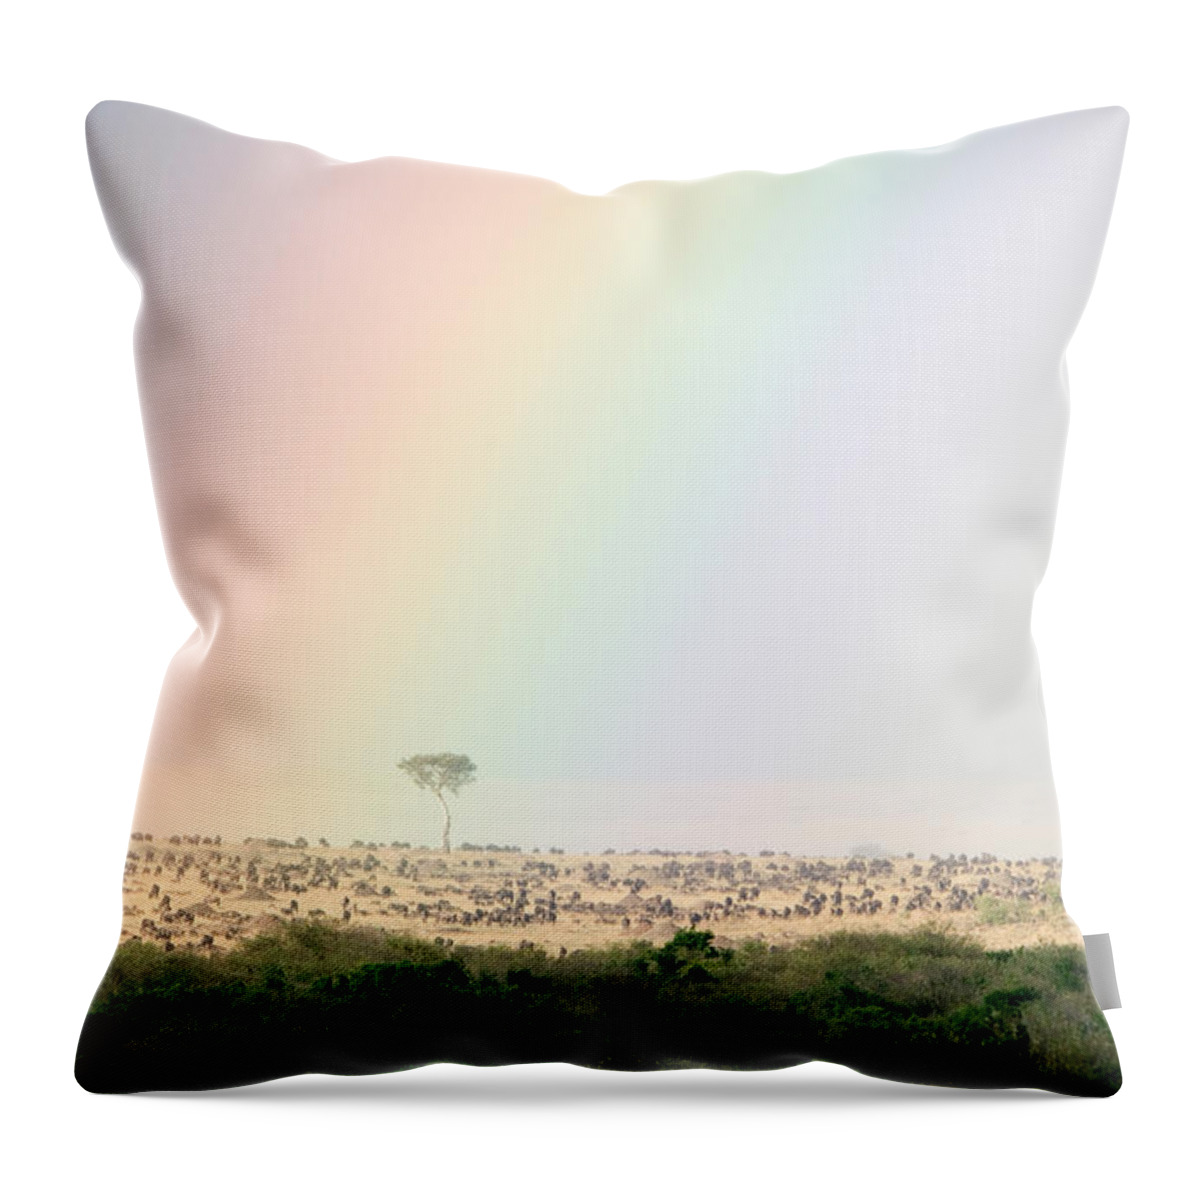 Photography Throw Pillow featuring the photograph Great Migration Of Wildebeests, Masai by Panoramic Images